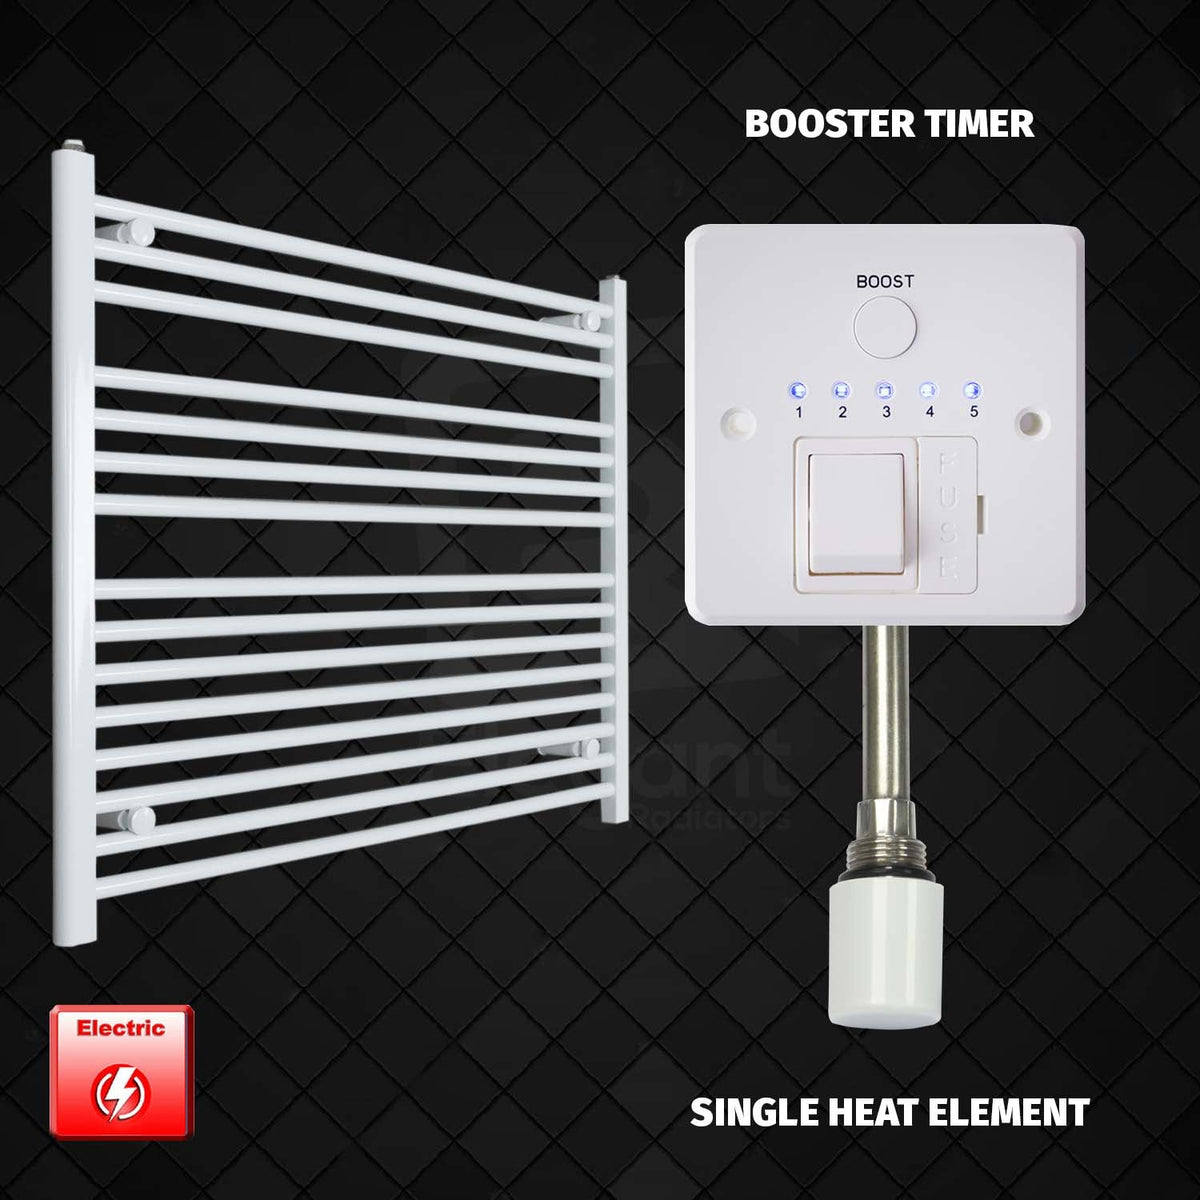 800 mm High 1100 mm Wide Pre-Filled Electric Heated Towel Rail Radiator White HTR Single heat element Booster timer